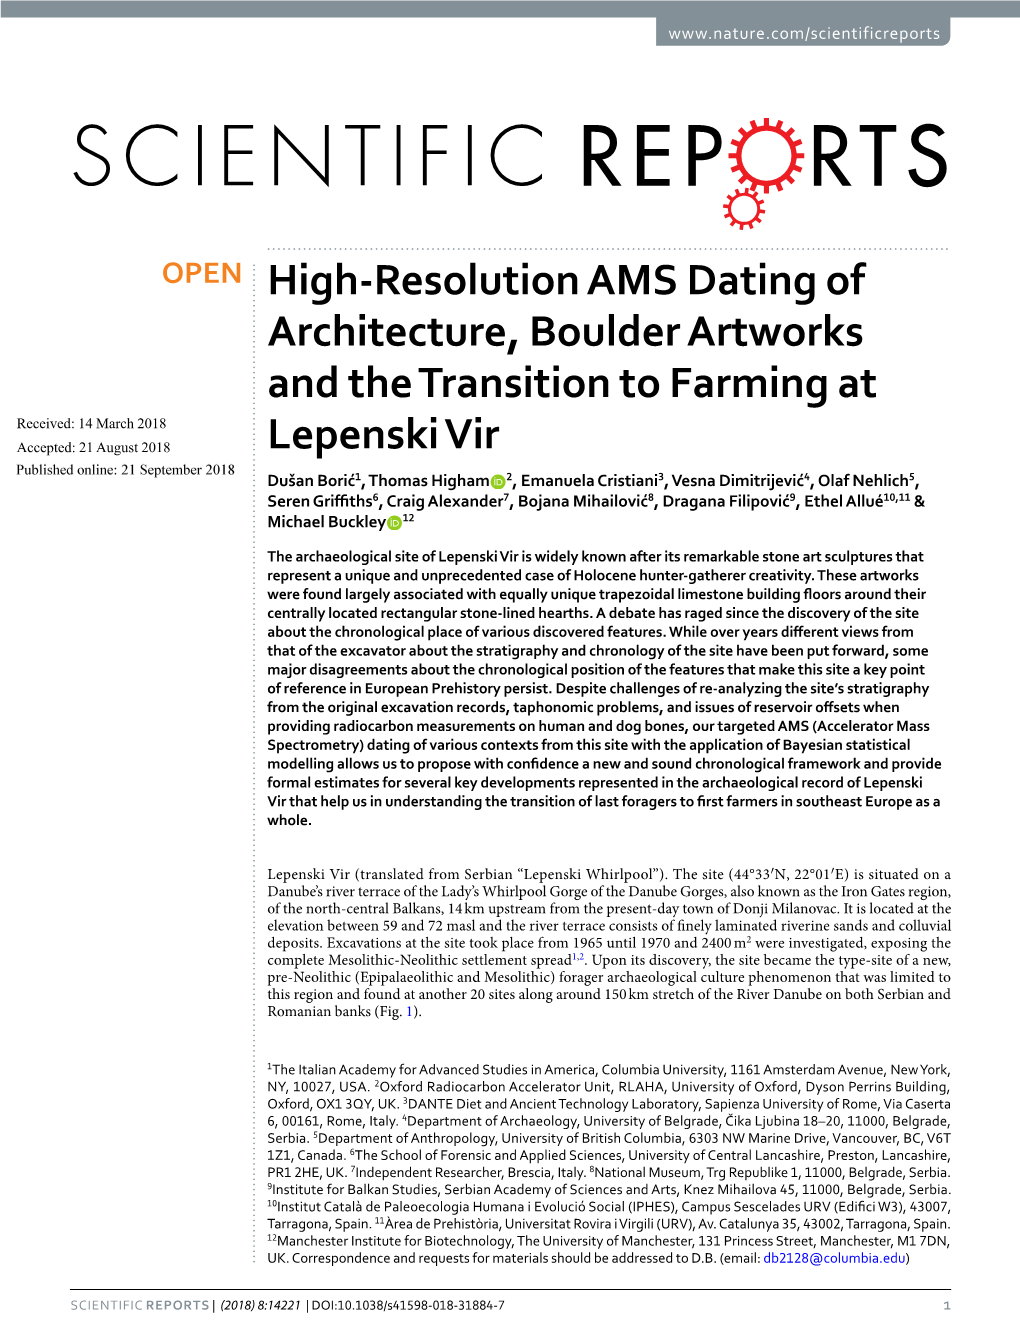 High-Resolution AMS Dating of Architecture, Boulder Artworks And